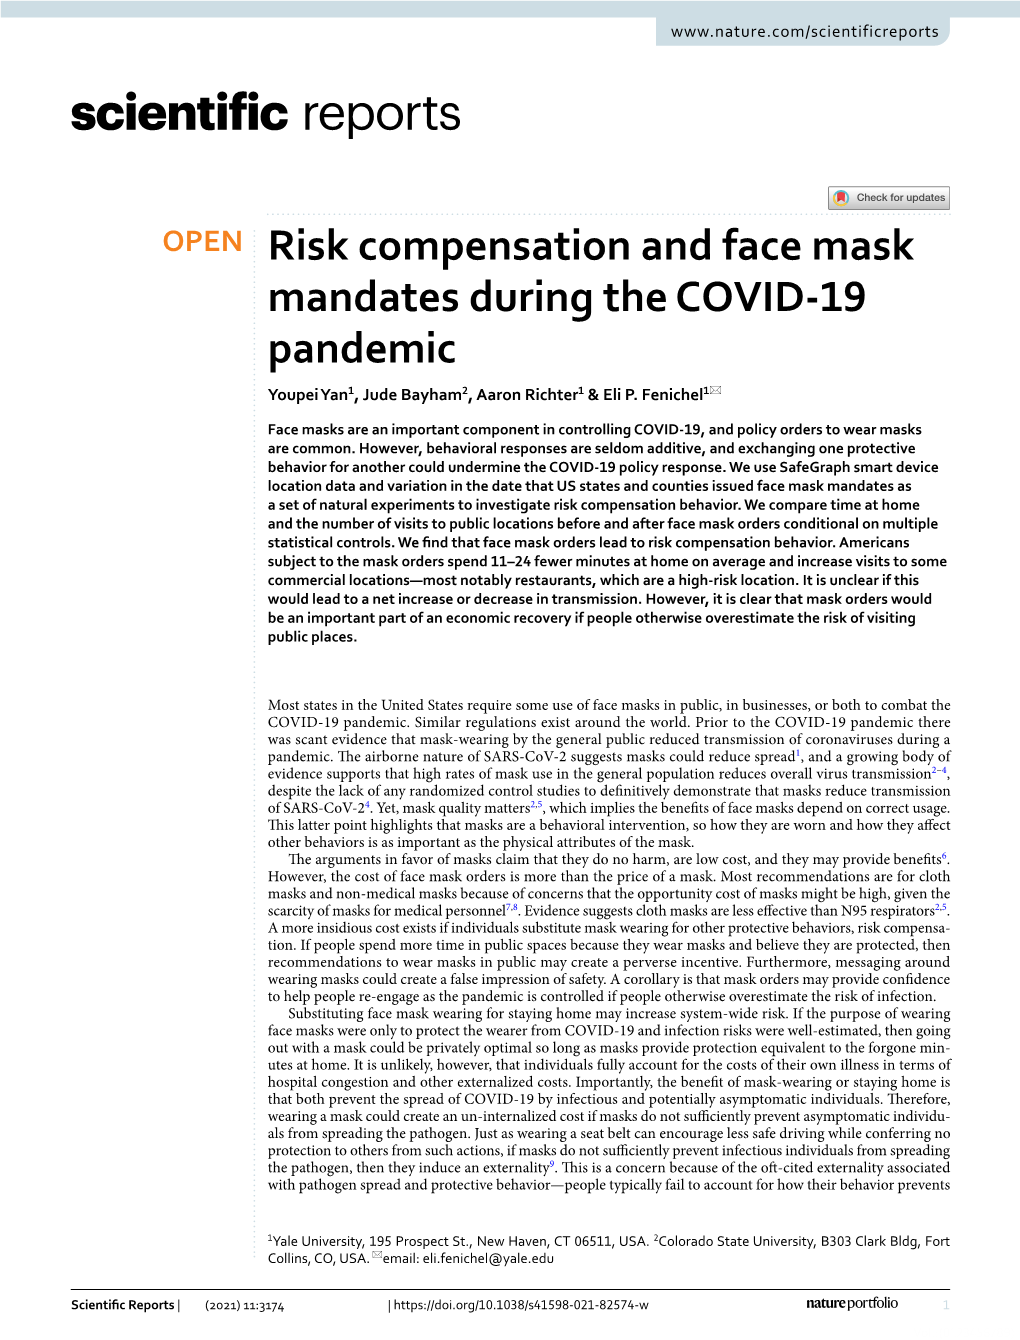 Risk Compensation and Face Mask Mandates During the COVID-19 Pandemic